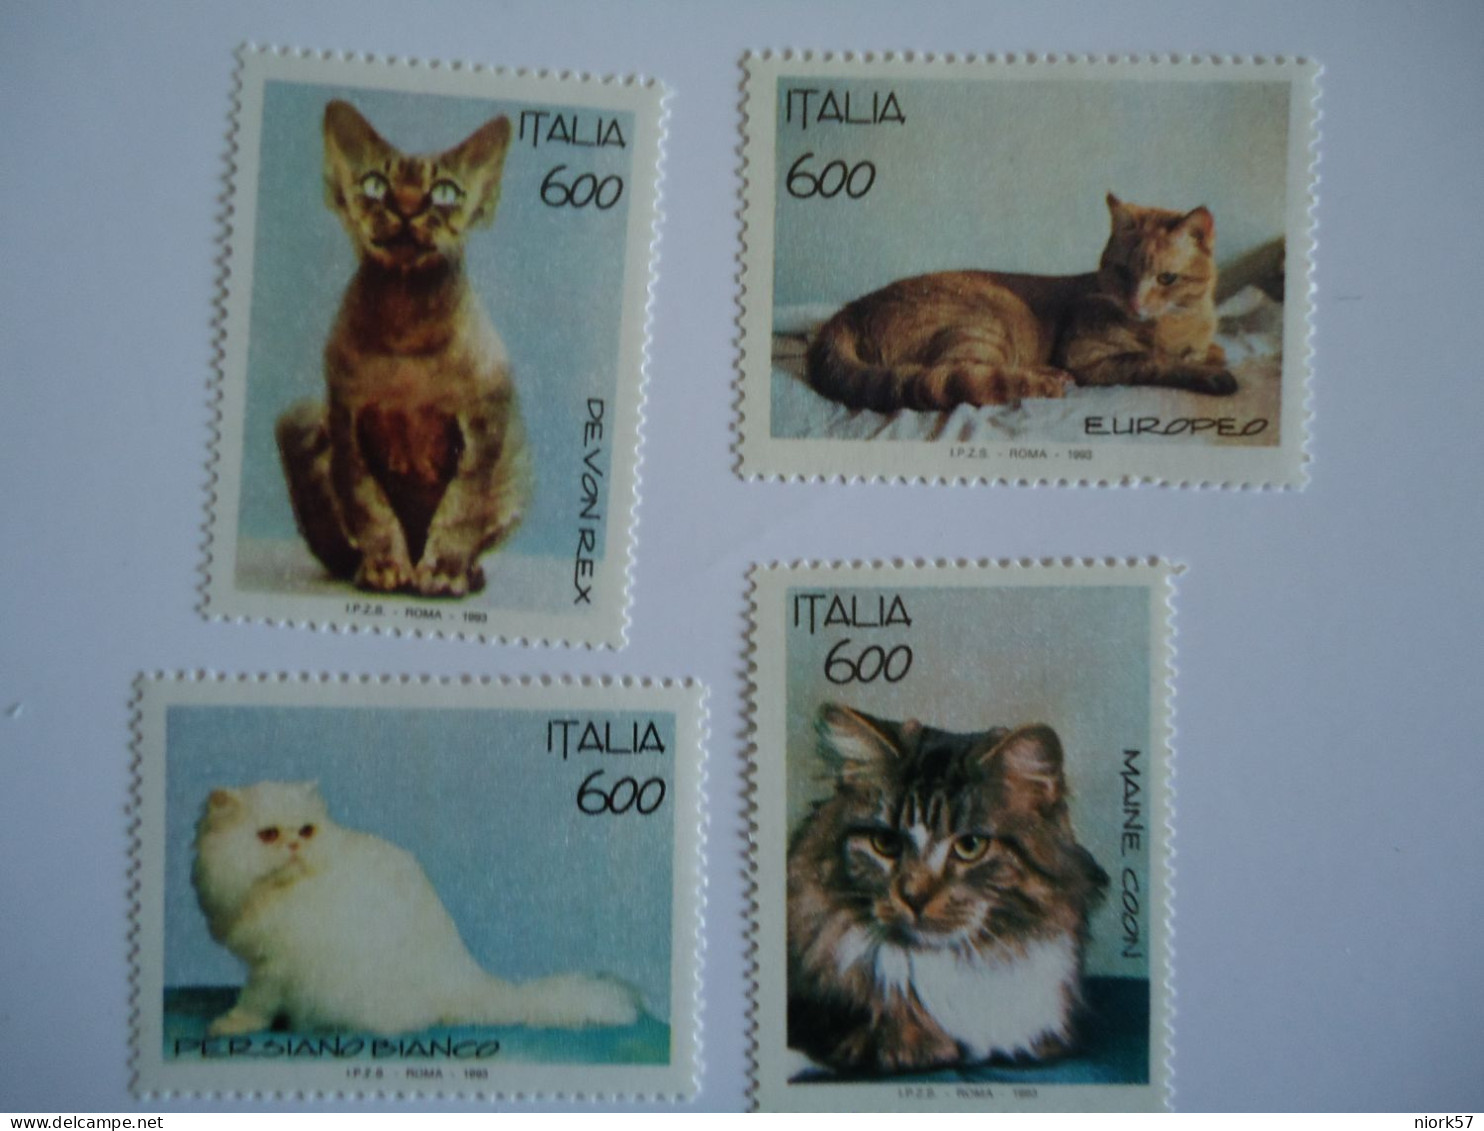 ITALY   MNH   4 STAMPS    ANIMALS  CAT CATS - Katten